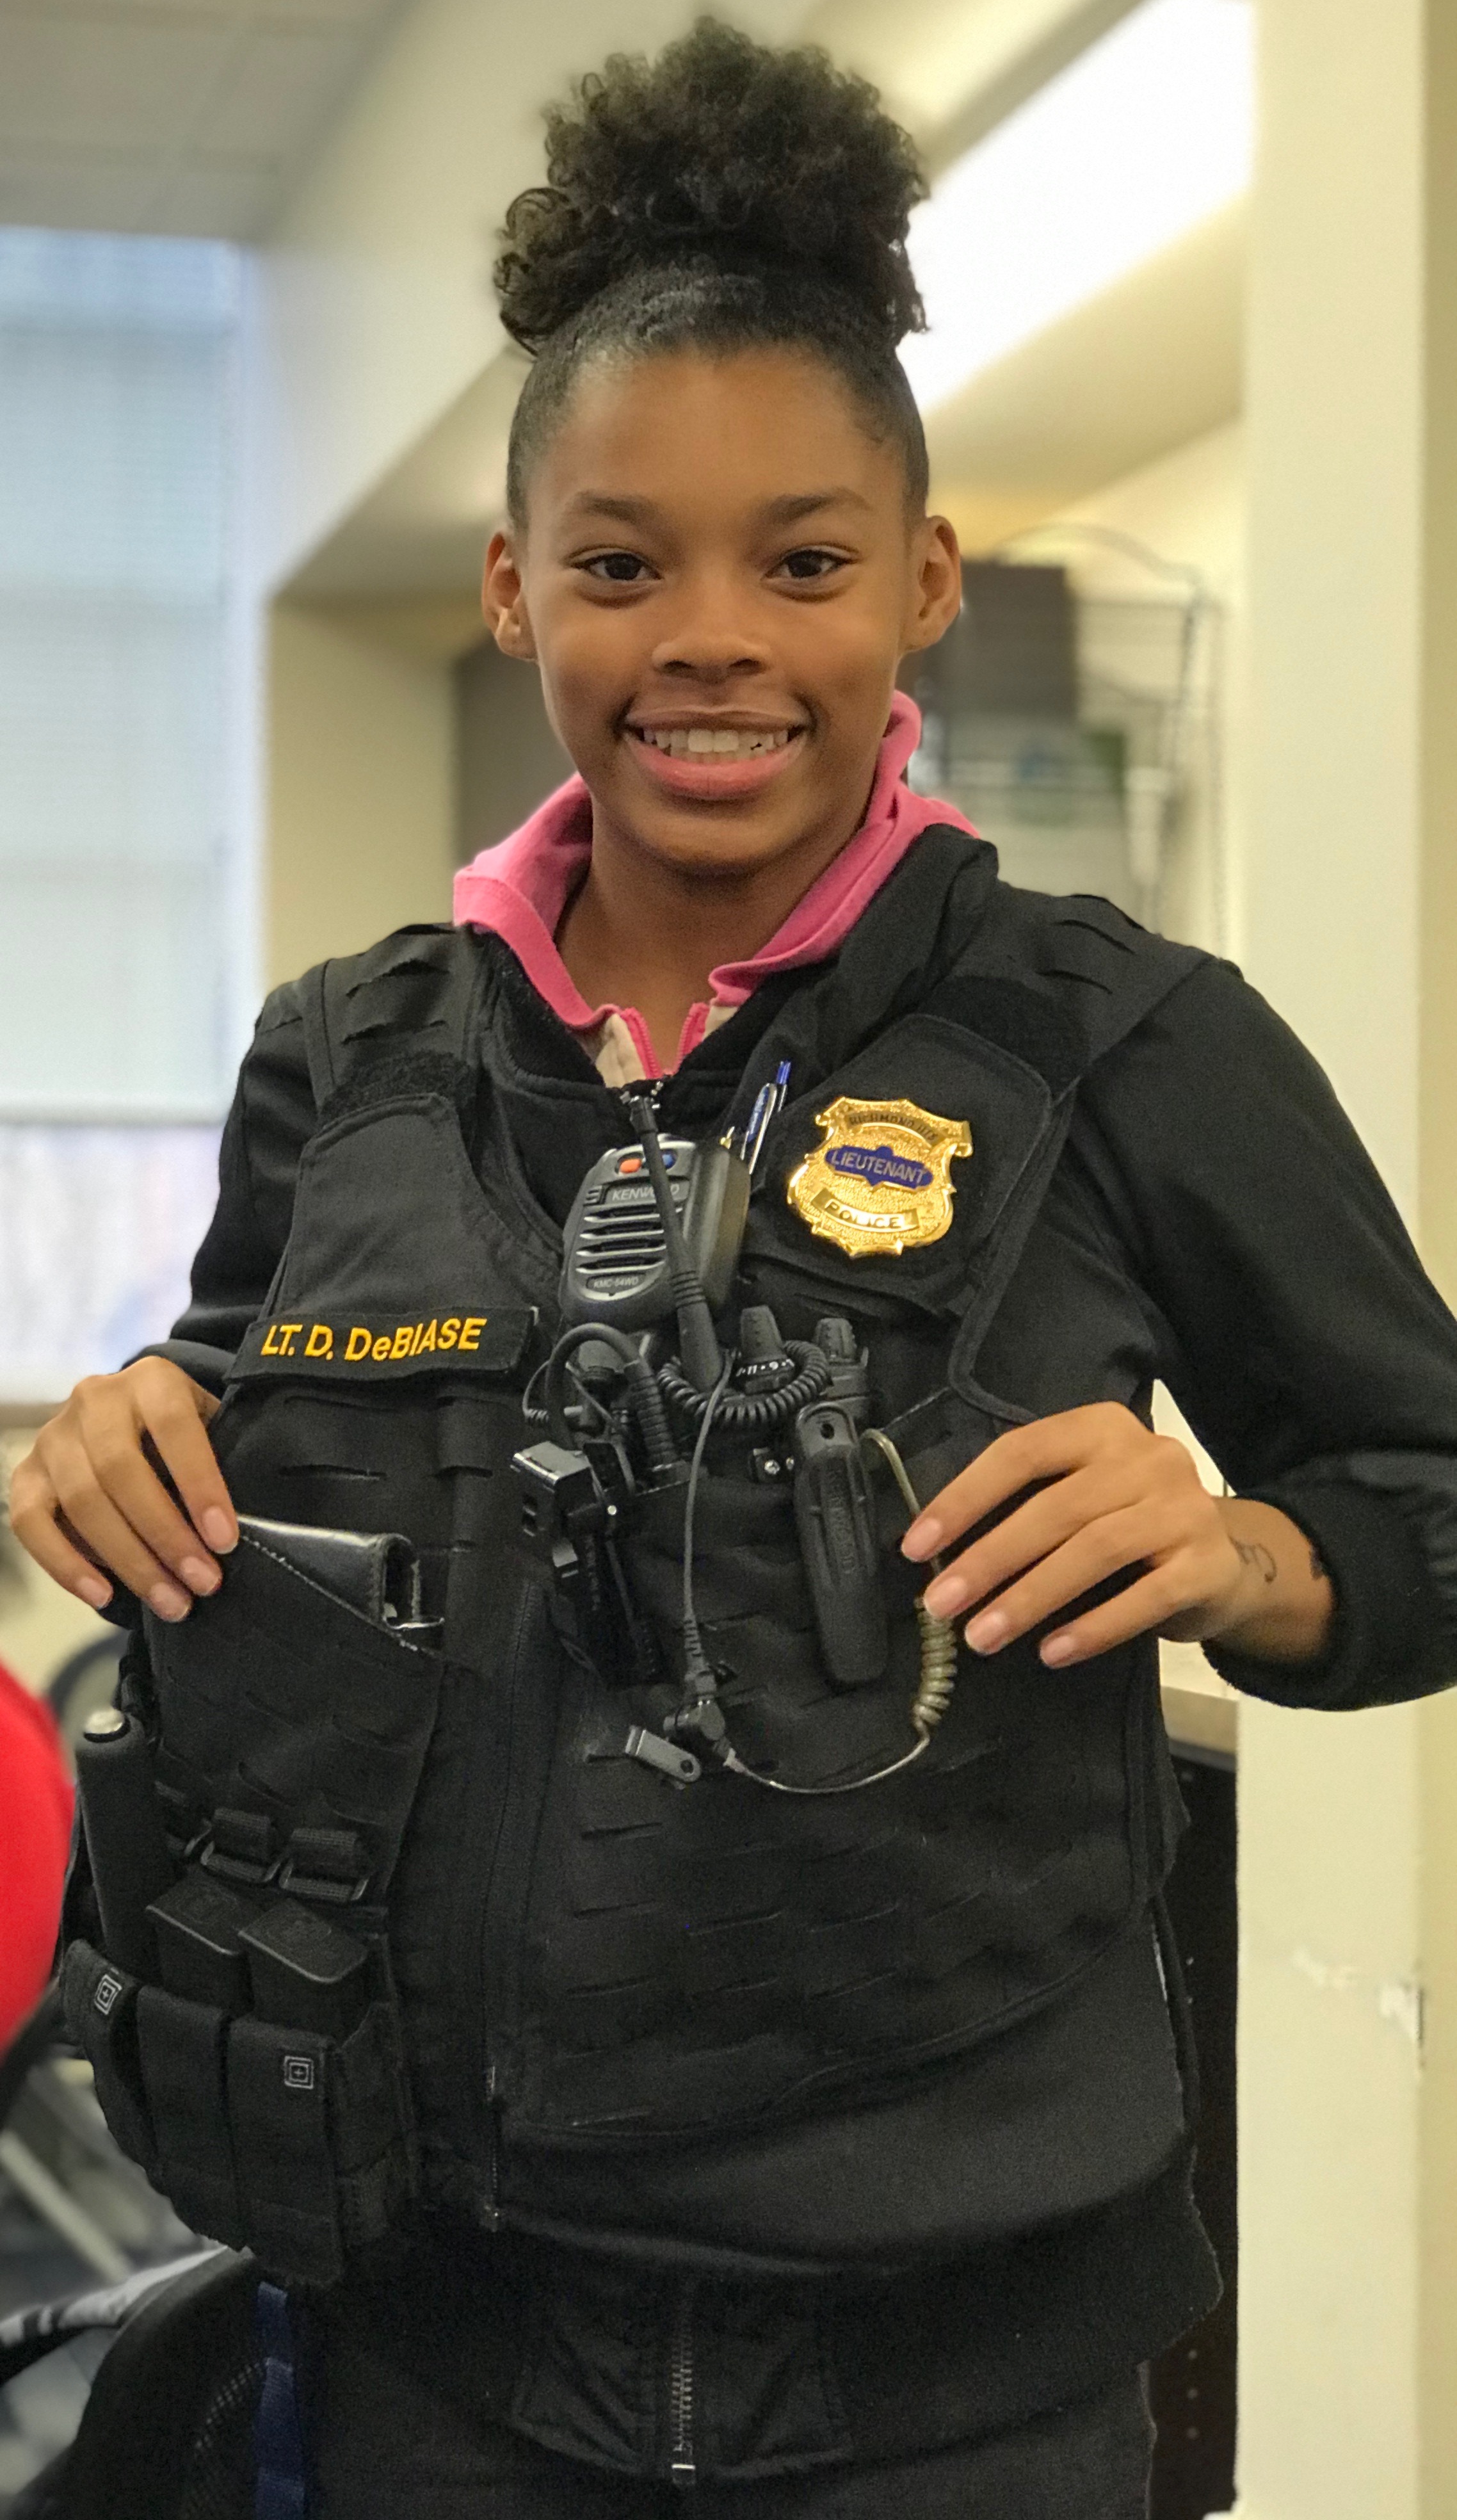 Richmond Heights Elementary student Amari Cloud tries on Lt. Denise DeBiase’s vest. Photo courtesy of Richmond Heights Police Department